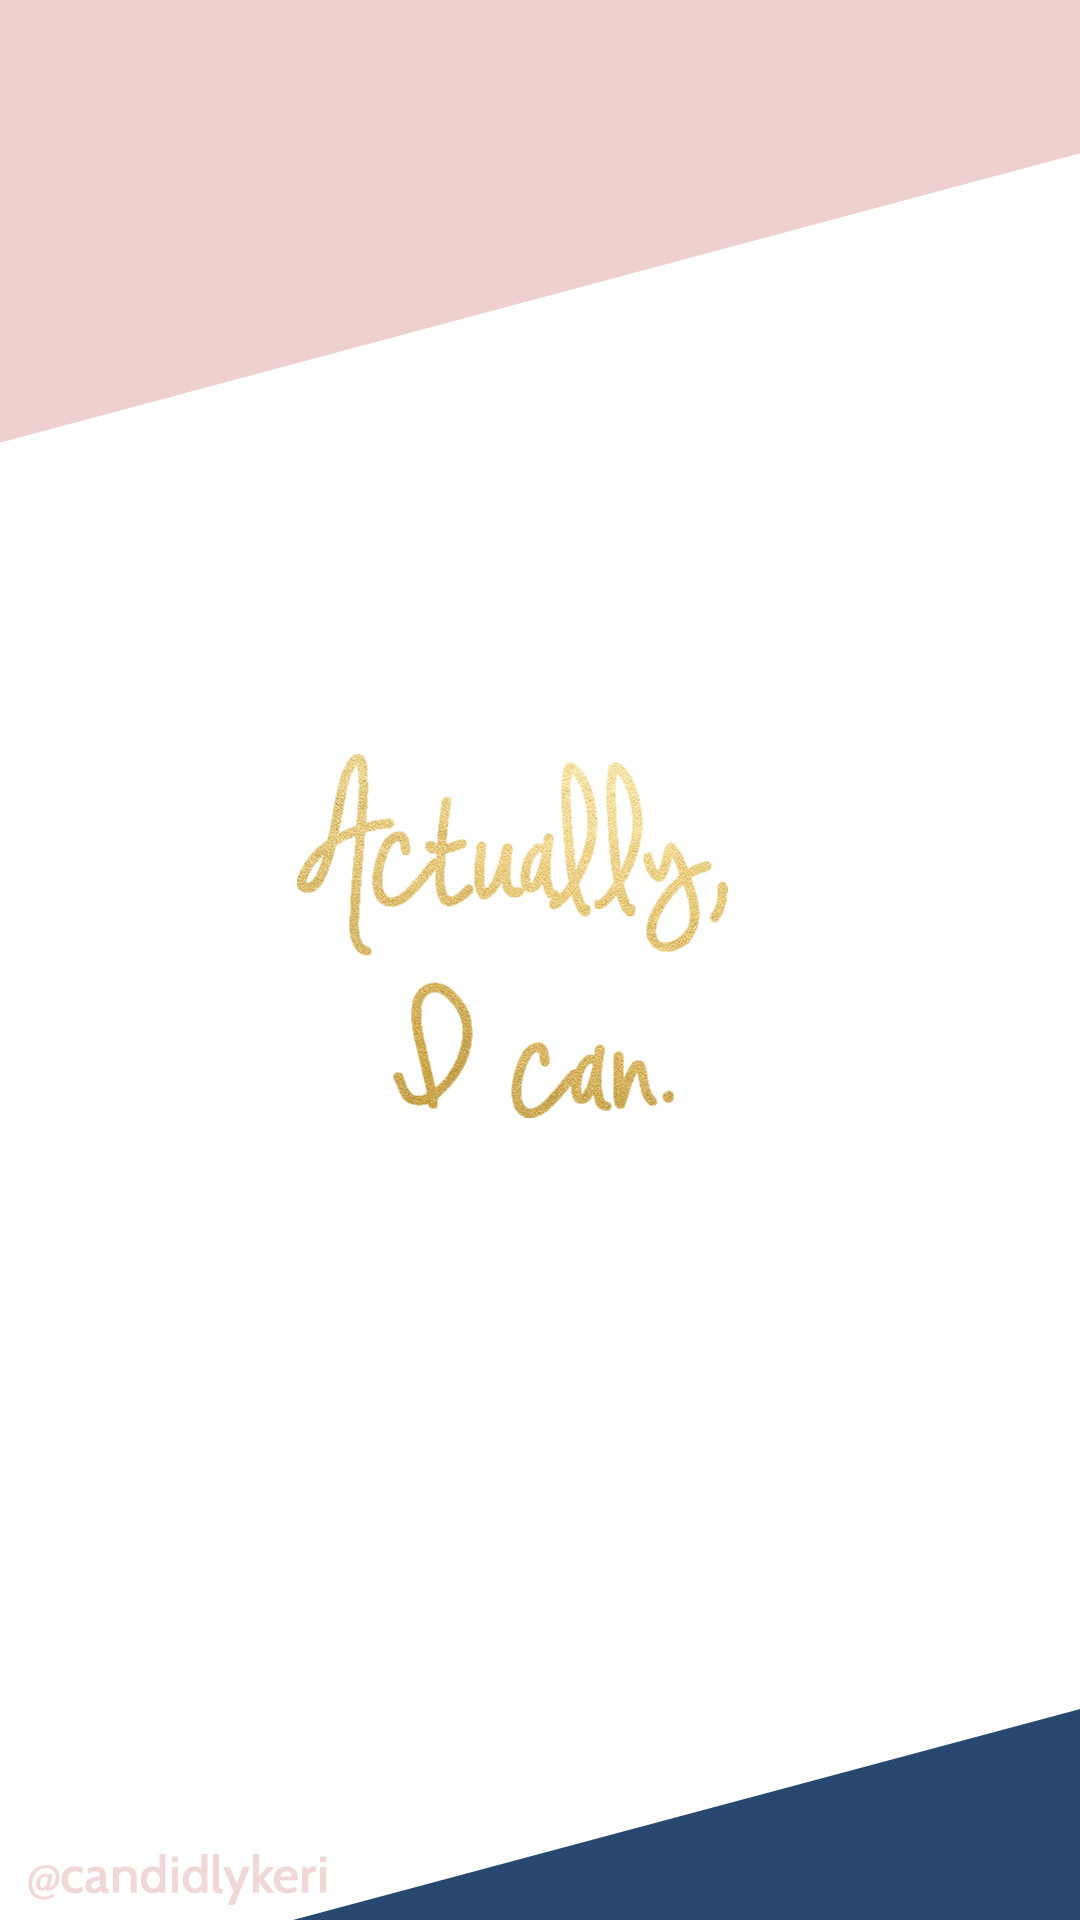 Actually I can, blush pink navy gold foil background wallpaper you can download for free